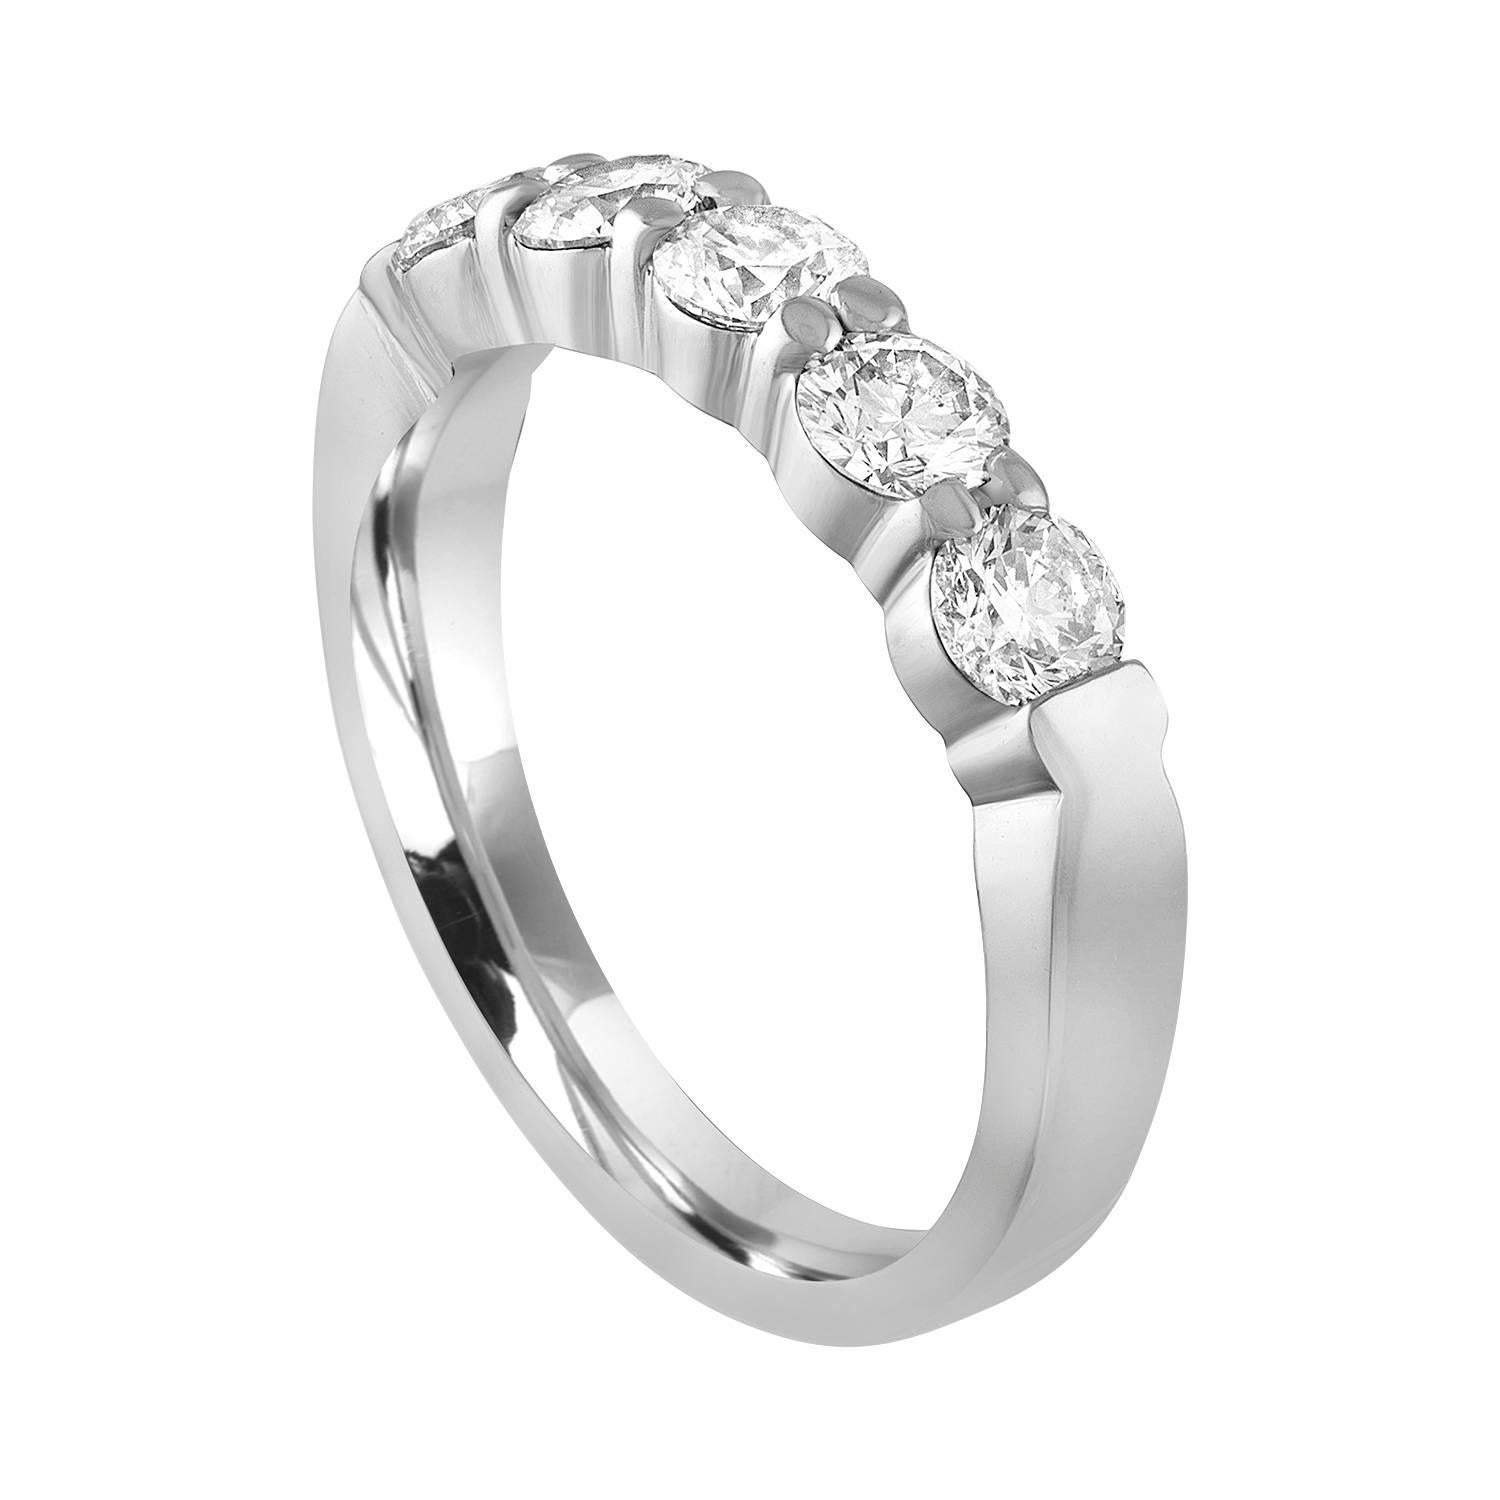 Very Beautiful Half Diamond Band Ring.
The ring is Platinum 950.
There are 5 Round Cut Diamonds prong set.
There is 1.00 Carat In Diamonds F/G VS.
The ring is a size 6, sizable. 
The band is 3.74 mm wide and tapers down to 2.53 mm.
The ring weighs